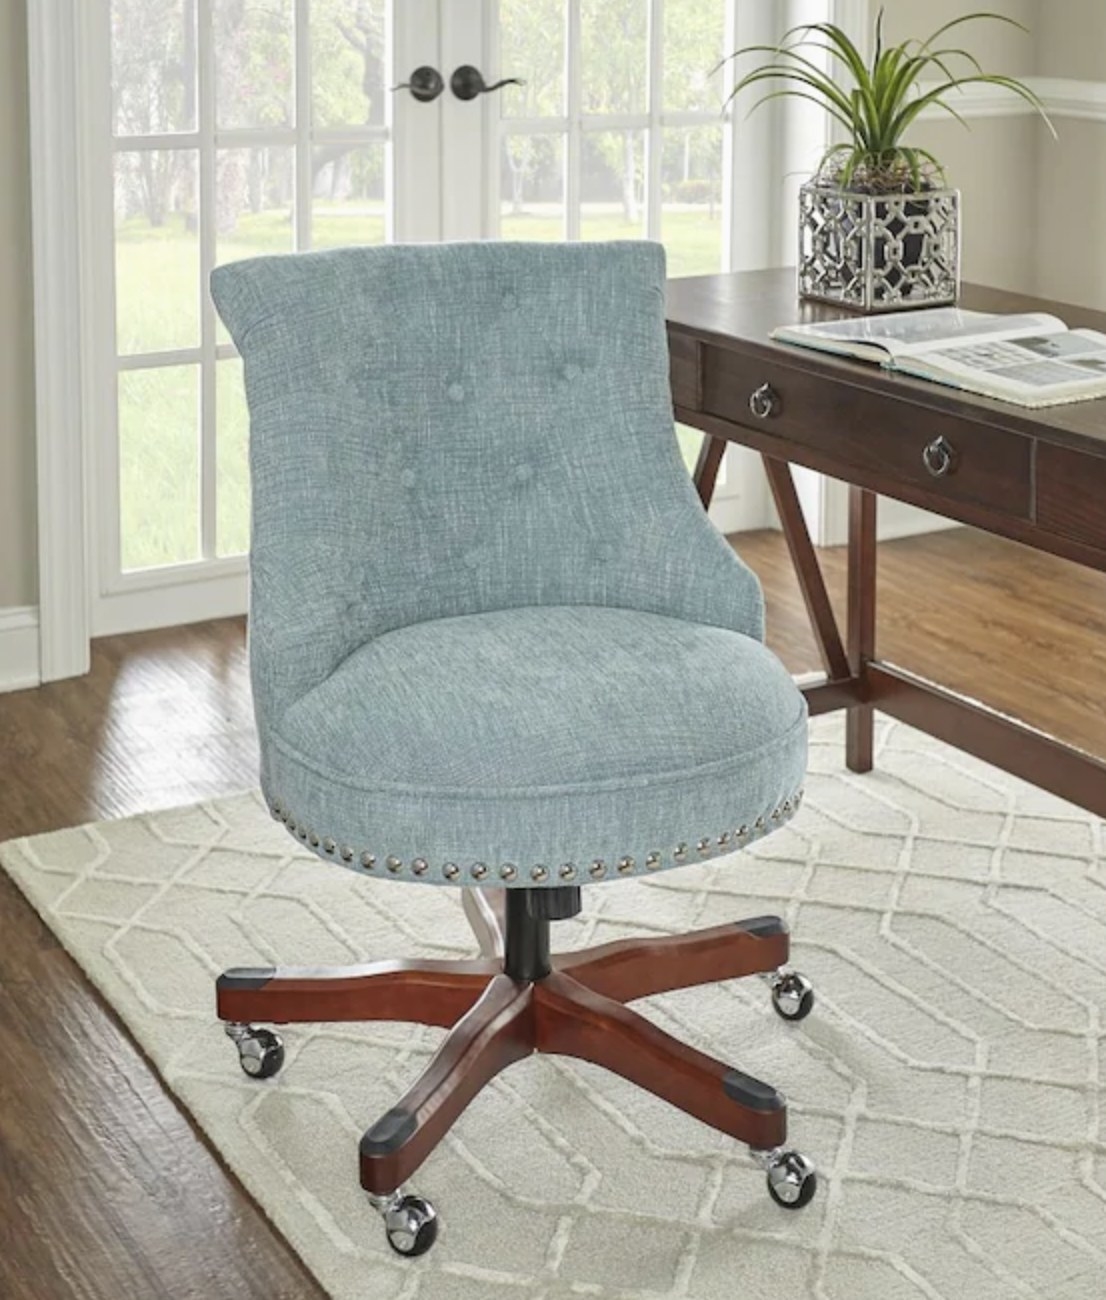 Aqua blue swivel chair with silver nail accents on wheels